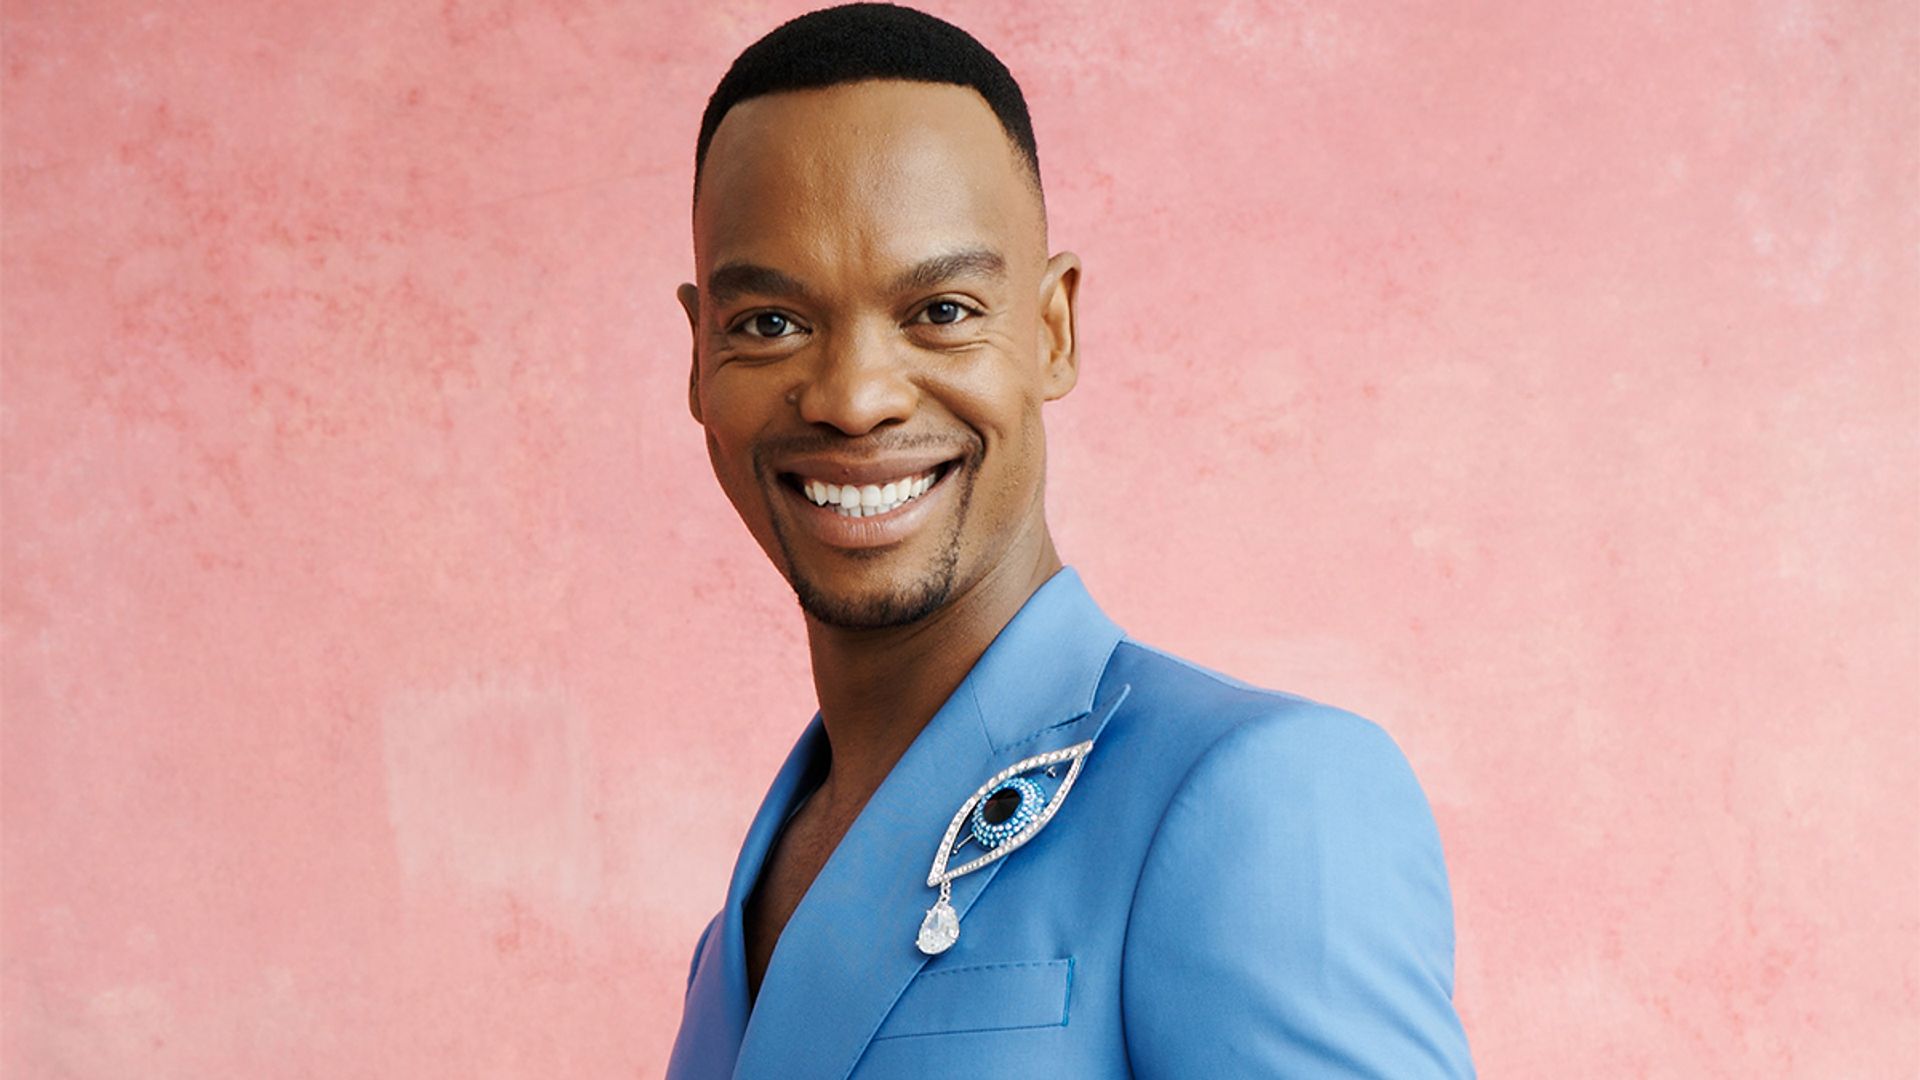 Strictly Come Dancing's Johannes Radebe wears a blue suit